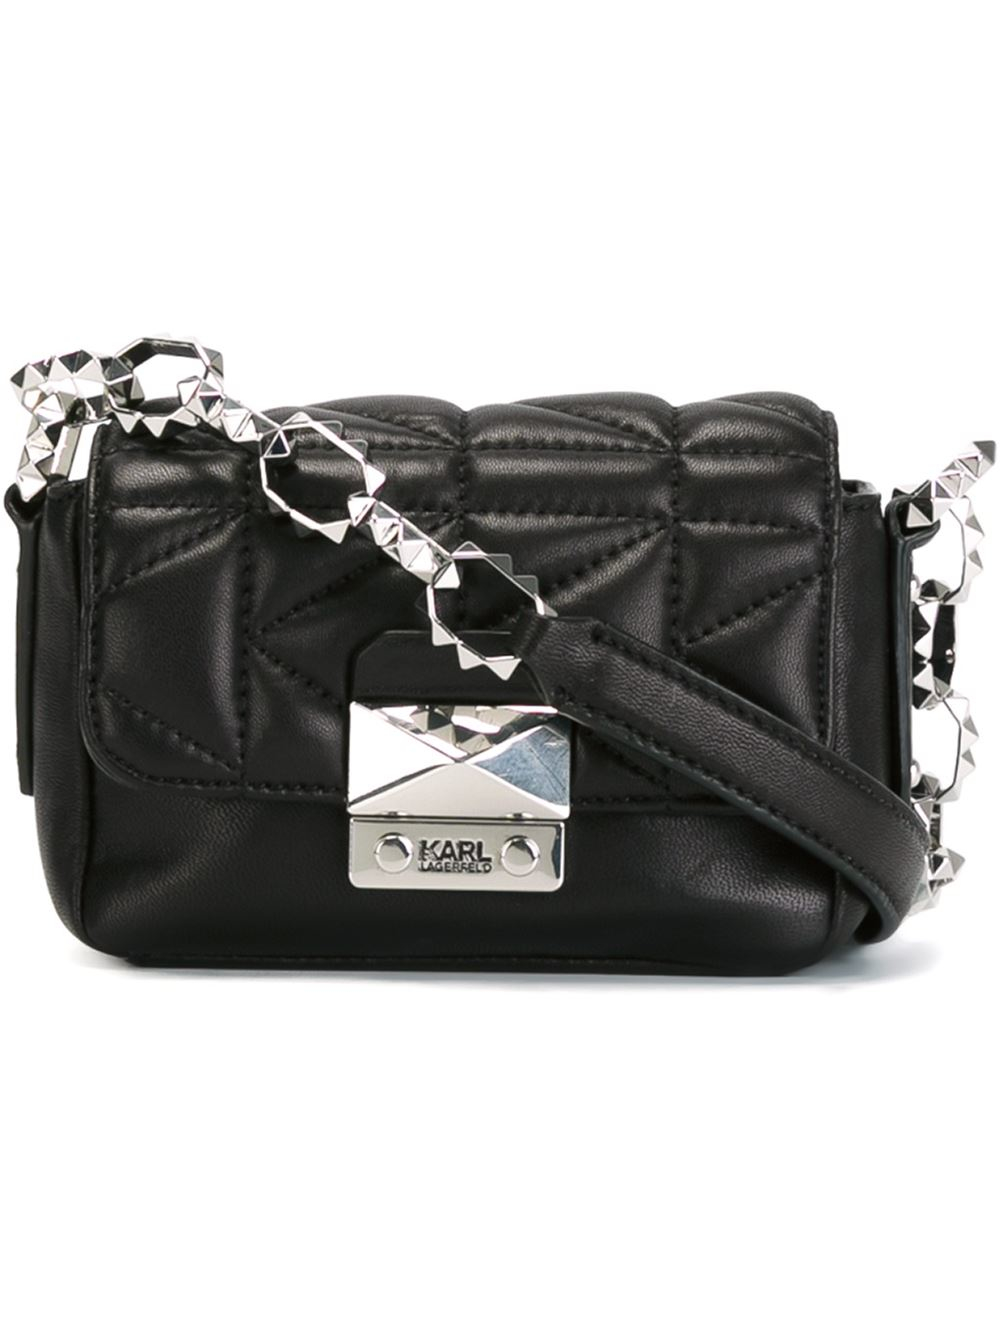 Lyst - Karl Lagerfeld Mini Quilted Cross-Body Bag in Black